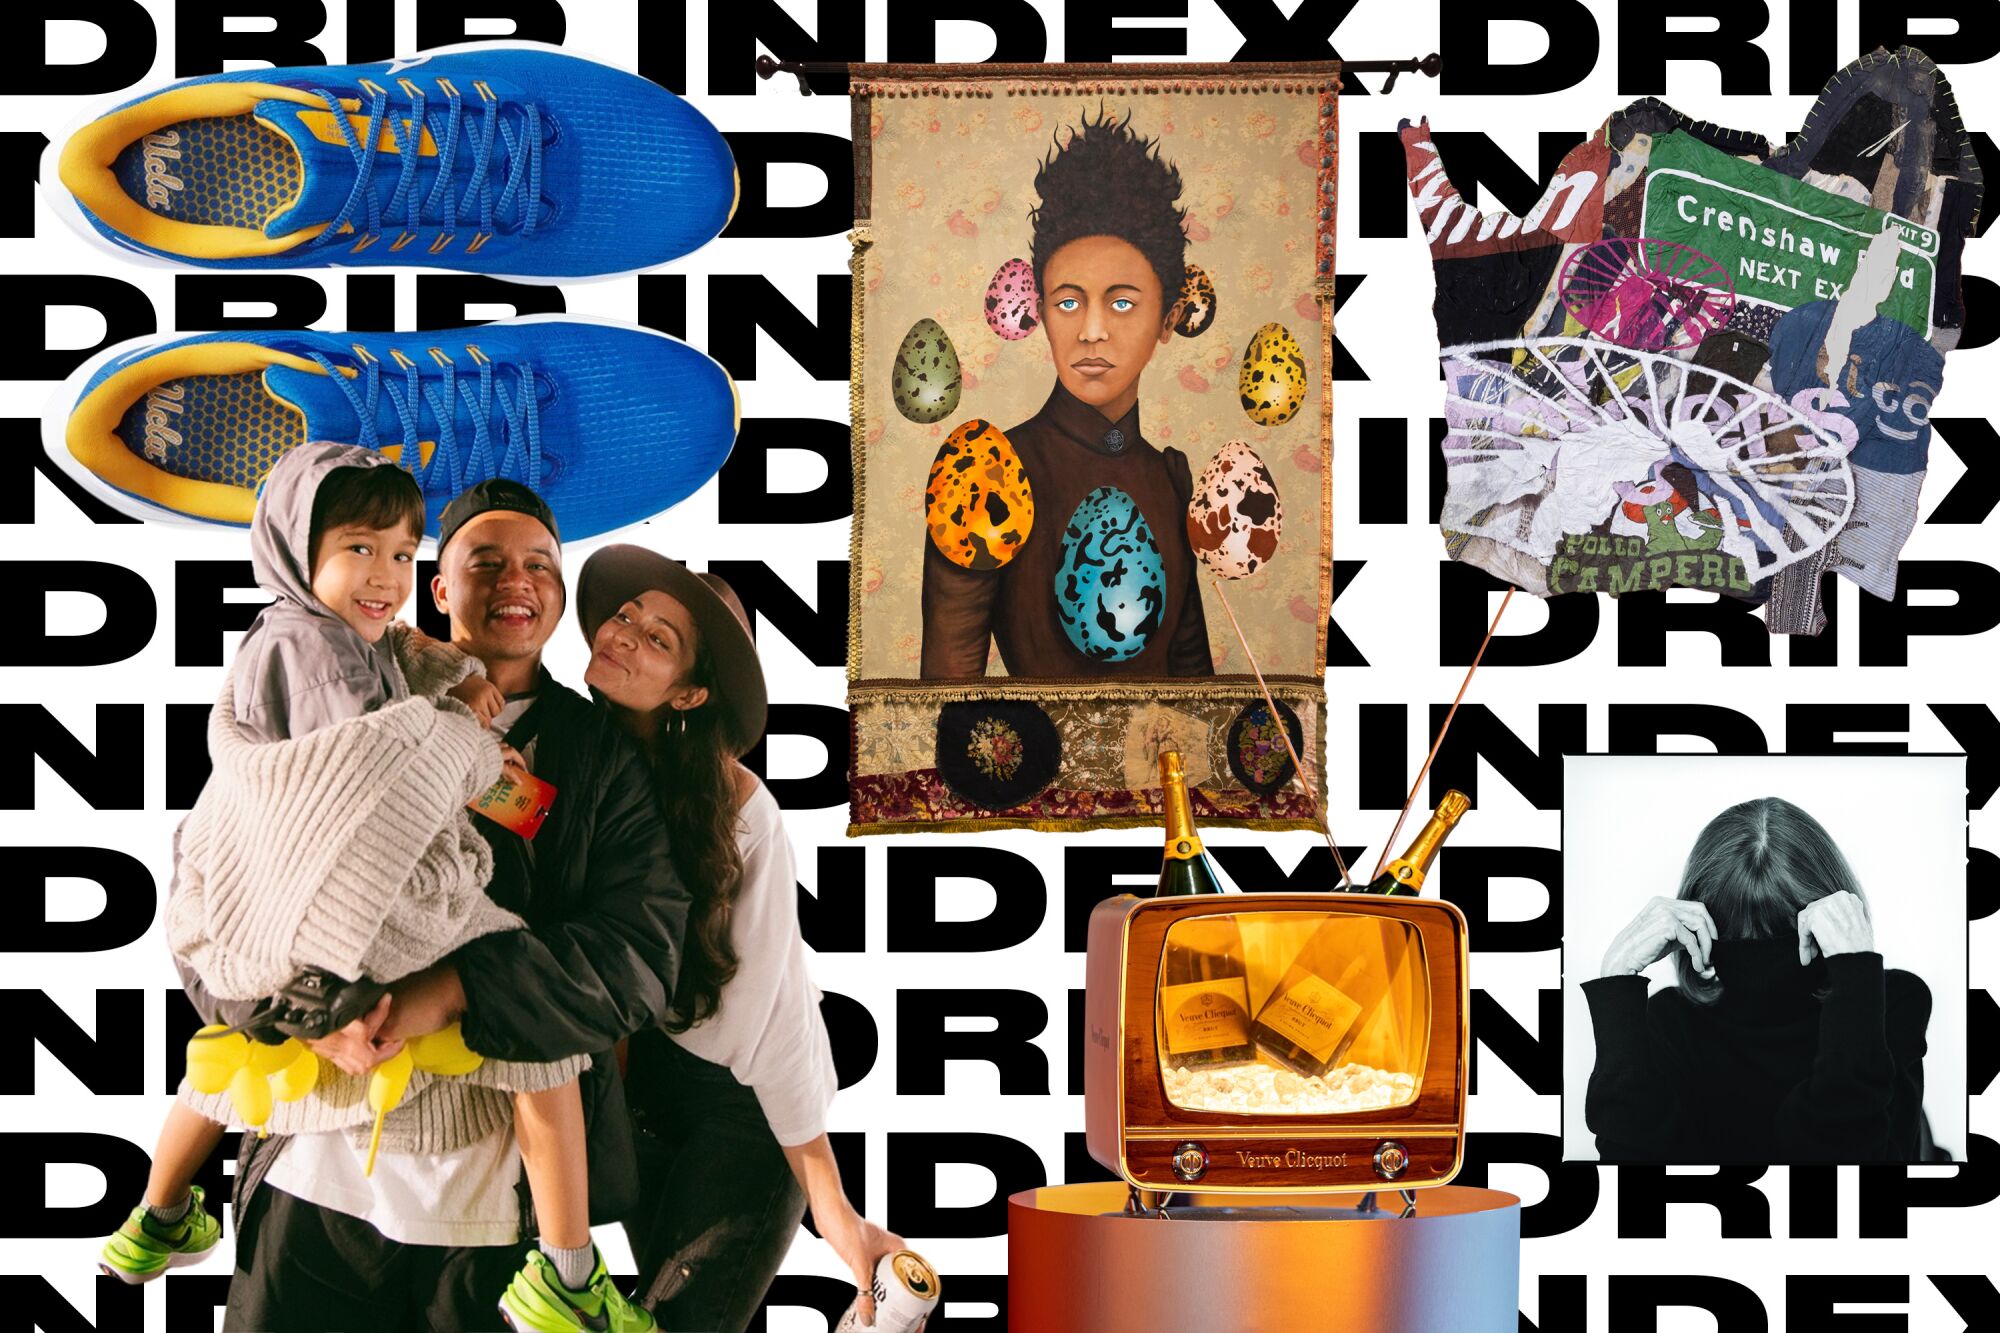 A collage shows blue sneakers, a family, two bottles of Champagne and artwork in front of a background reading "Drip Index."